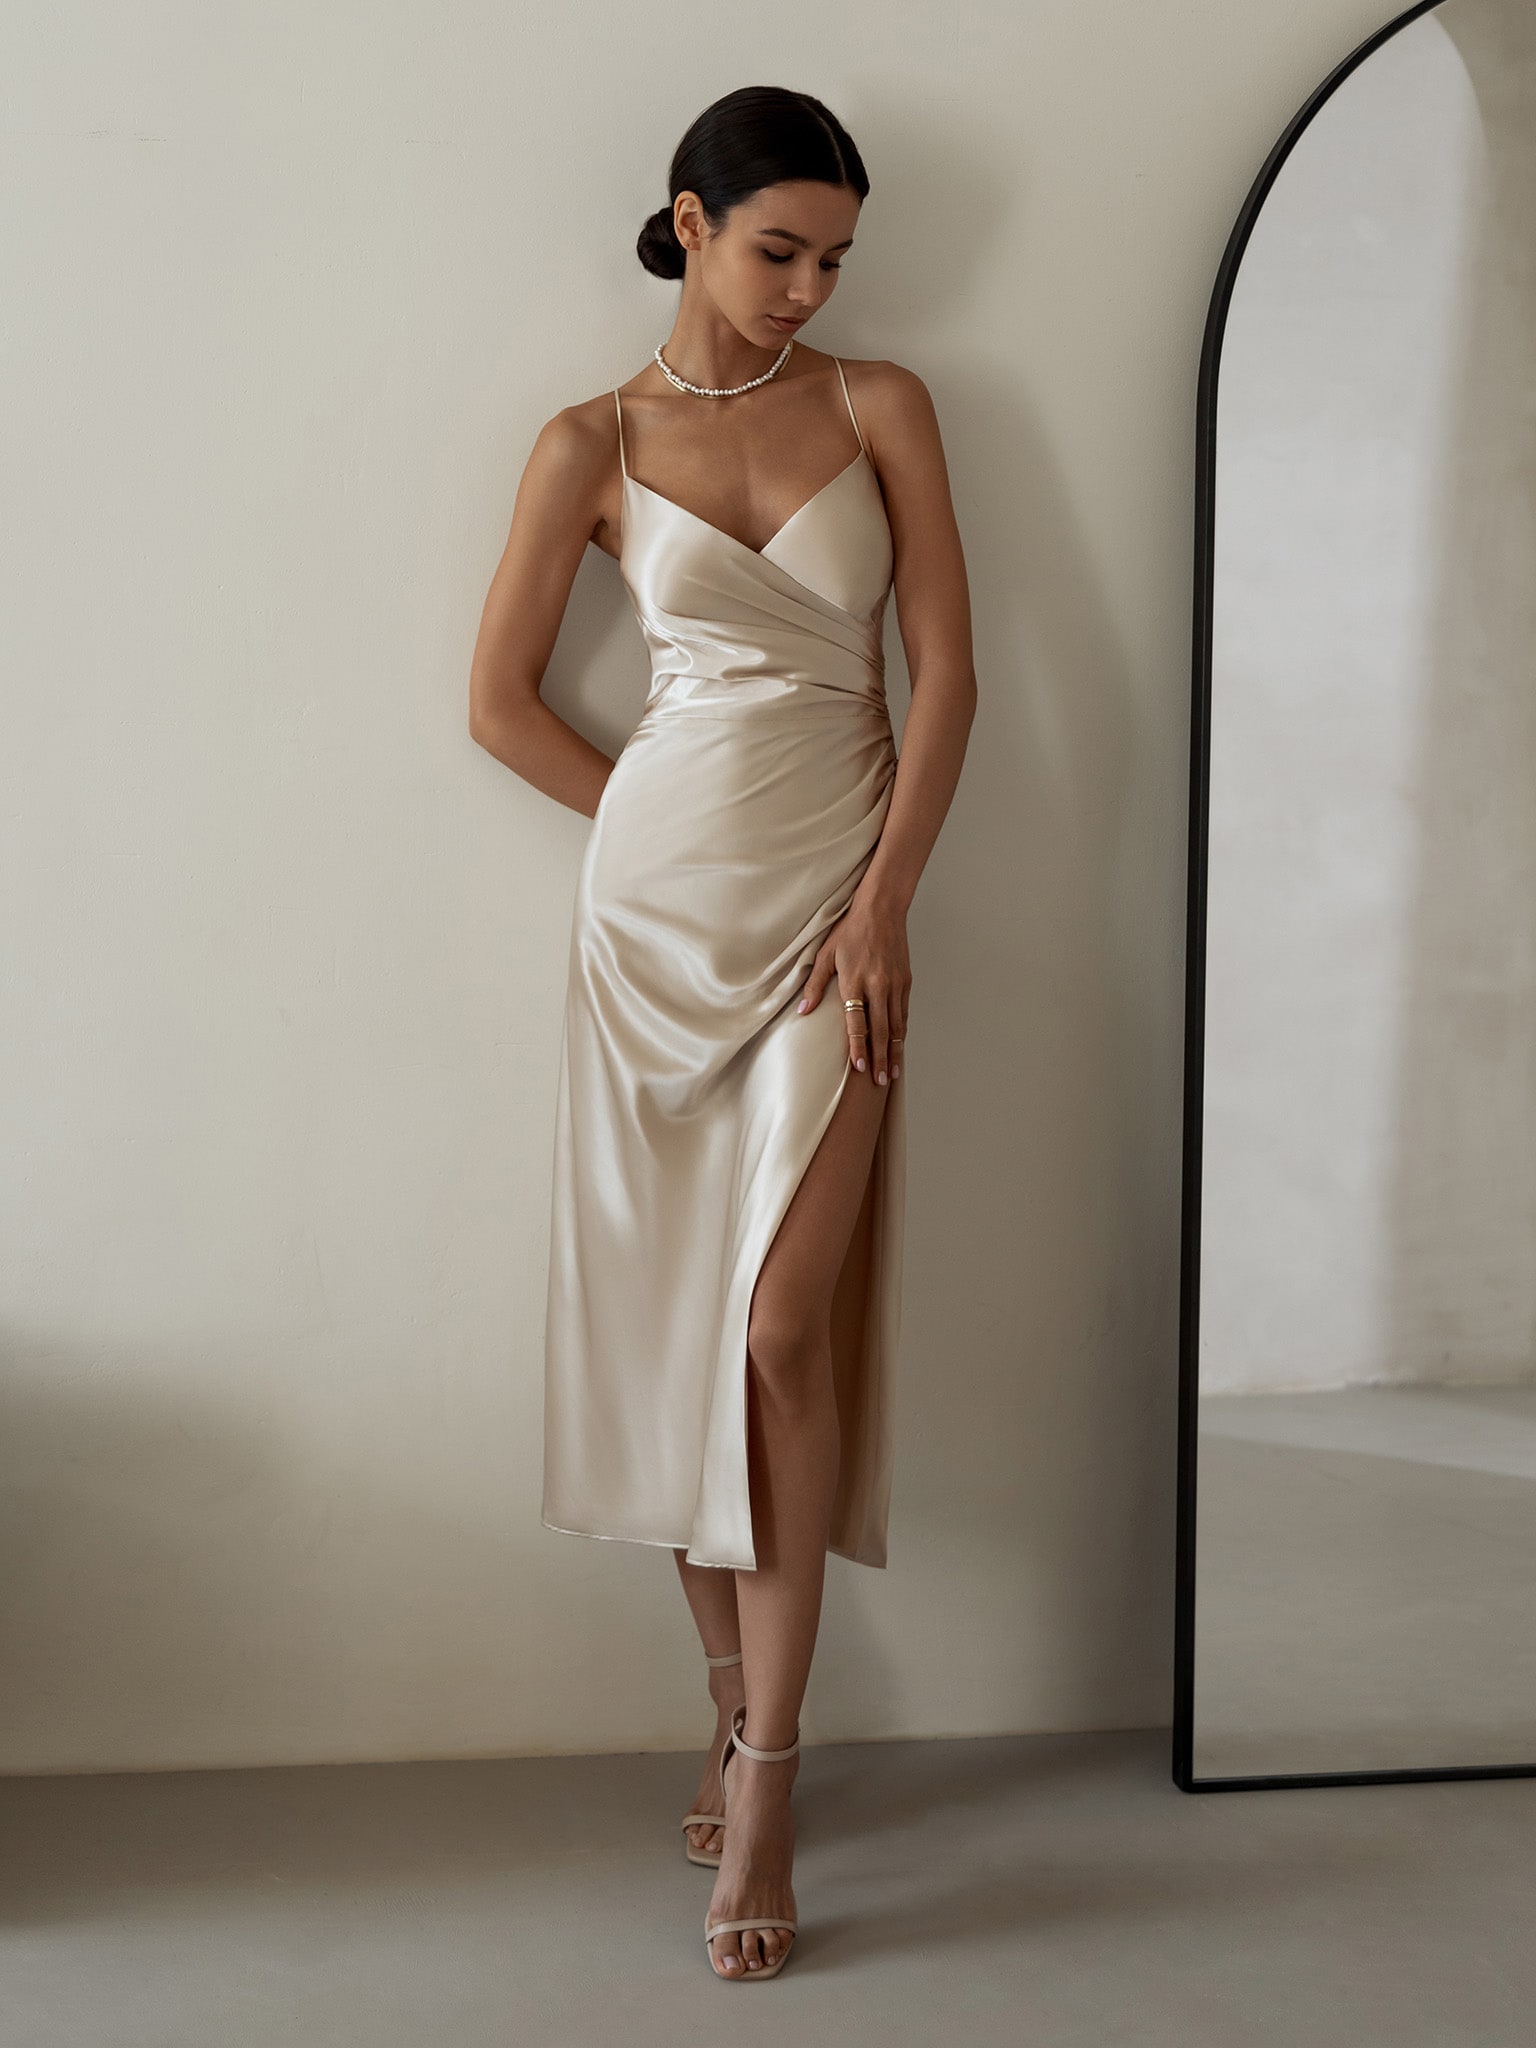 Wedding Dress Code: How and What to Dress as a Guest